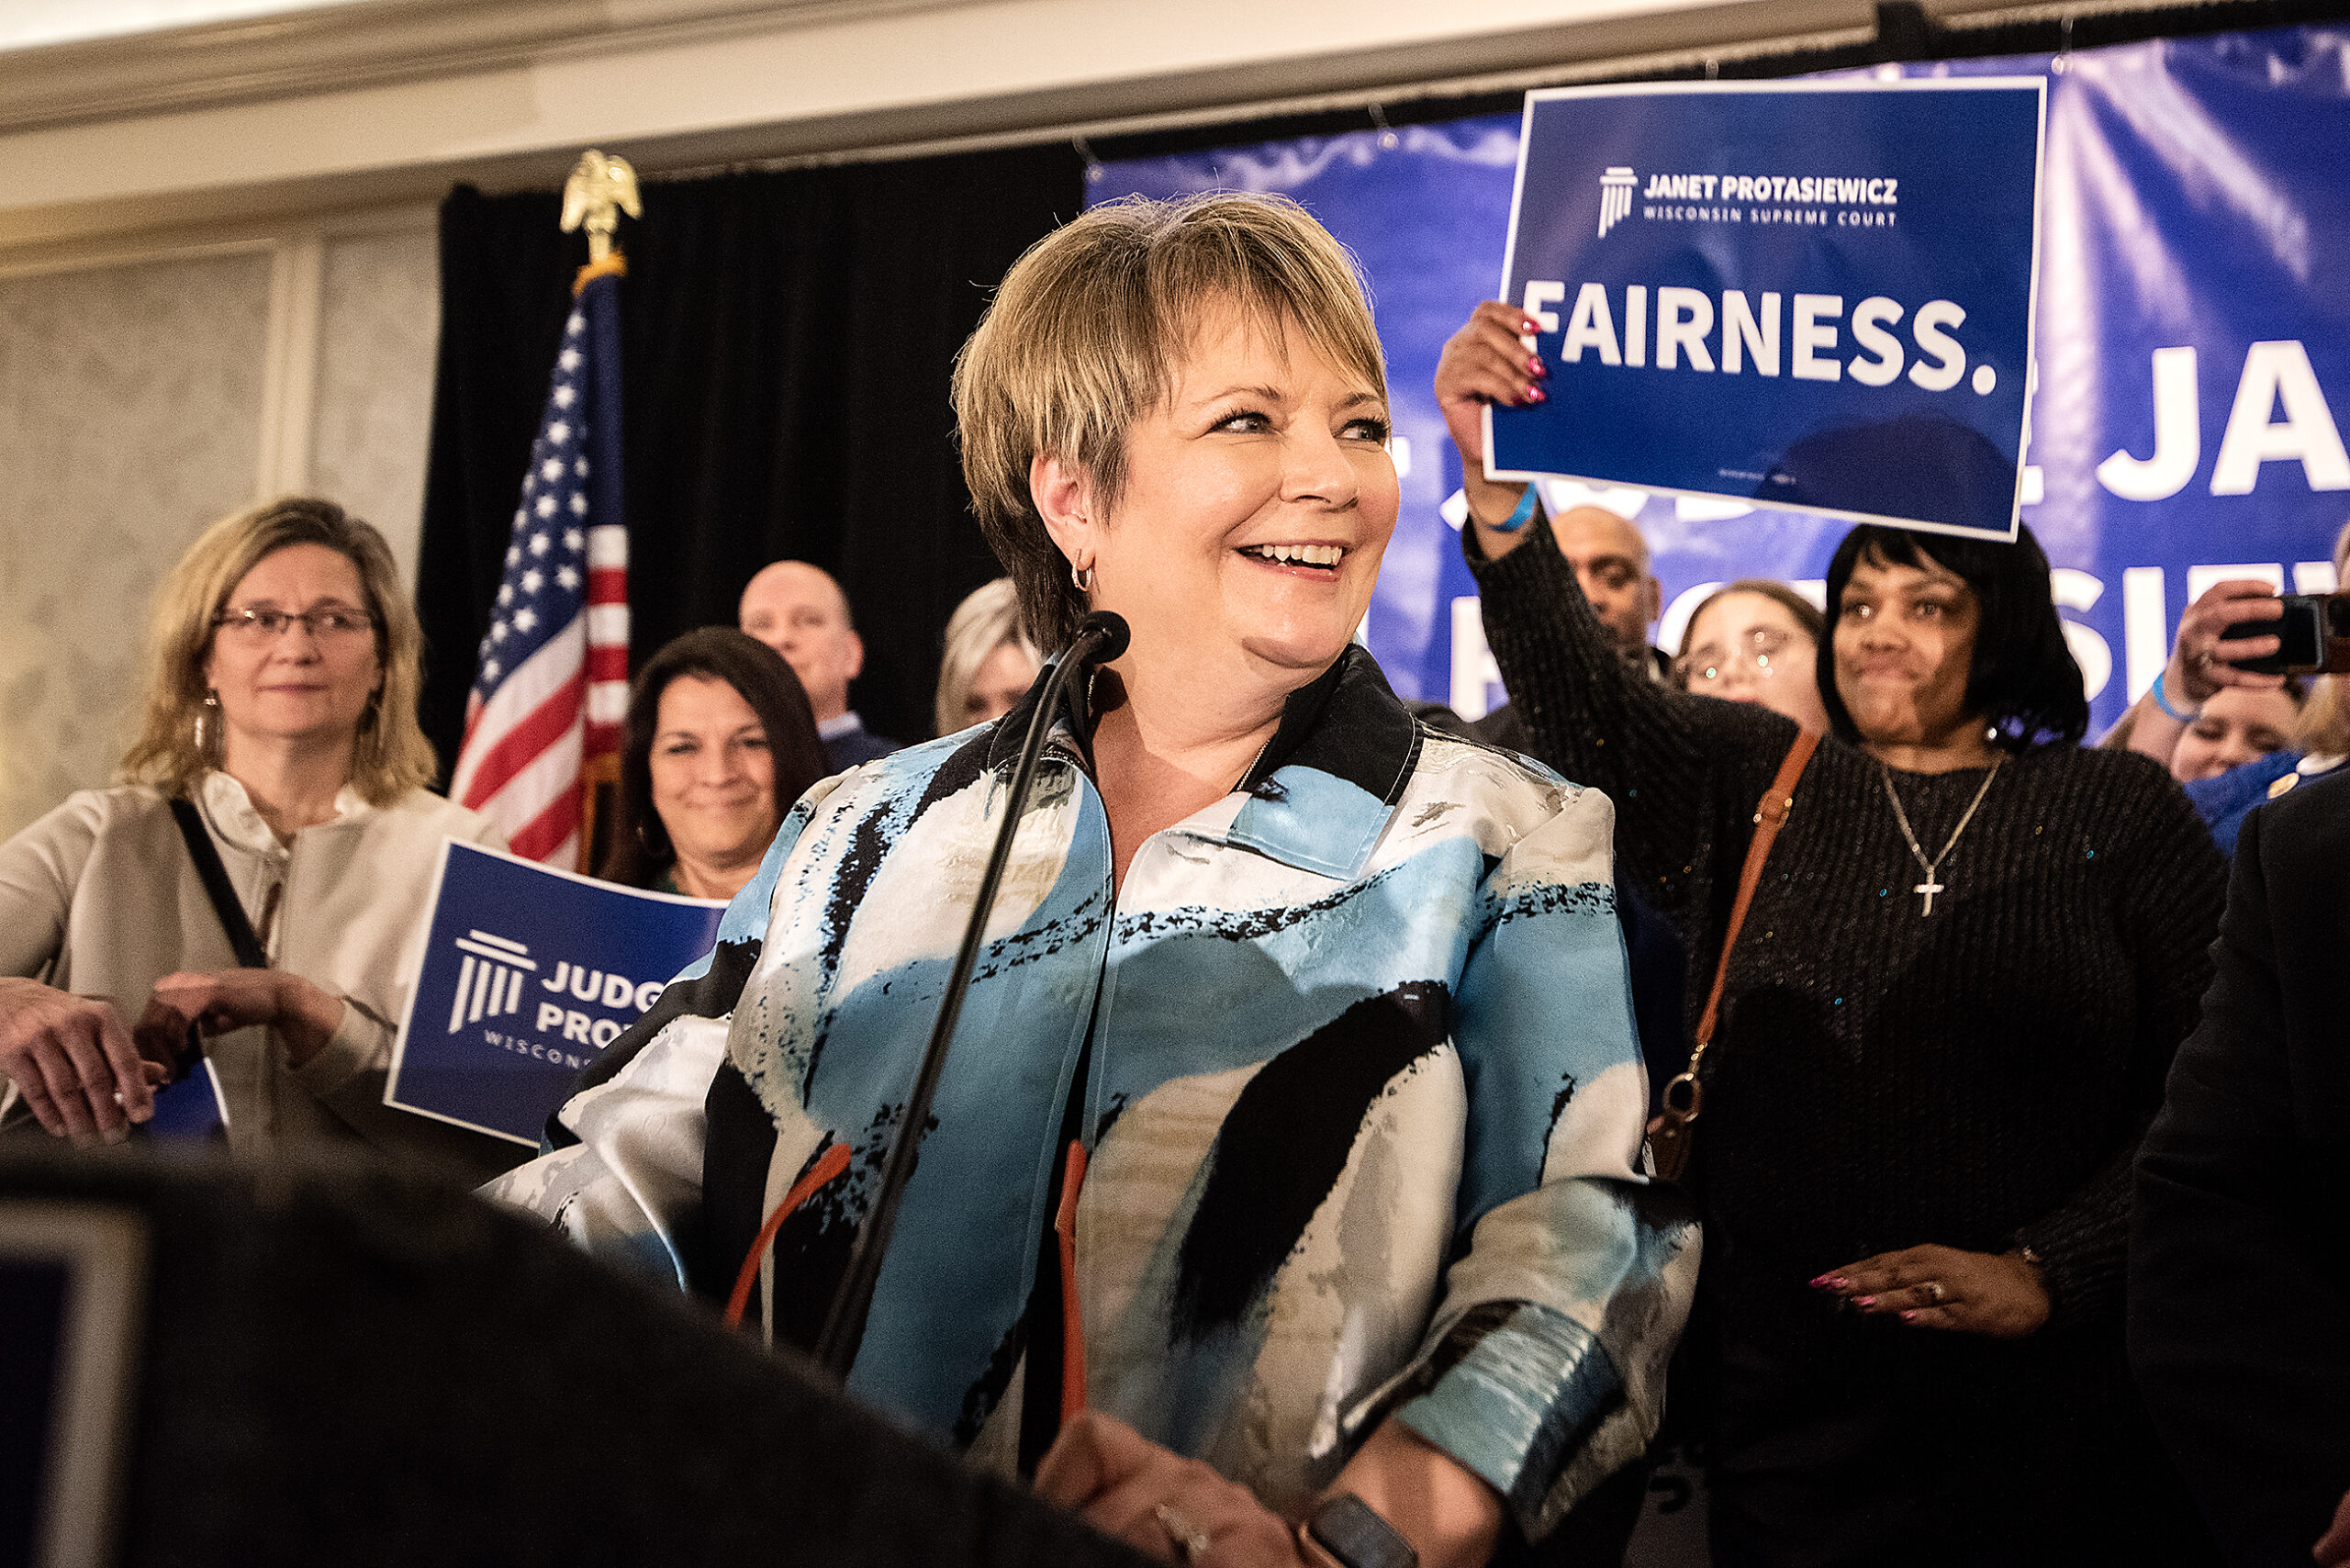 Janet Protasiewicz smiles and looks off at the crowd. A woman in the crowd behind her holds up a sign that says "FAIRNESS."